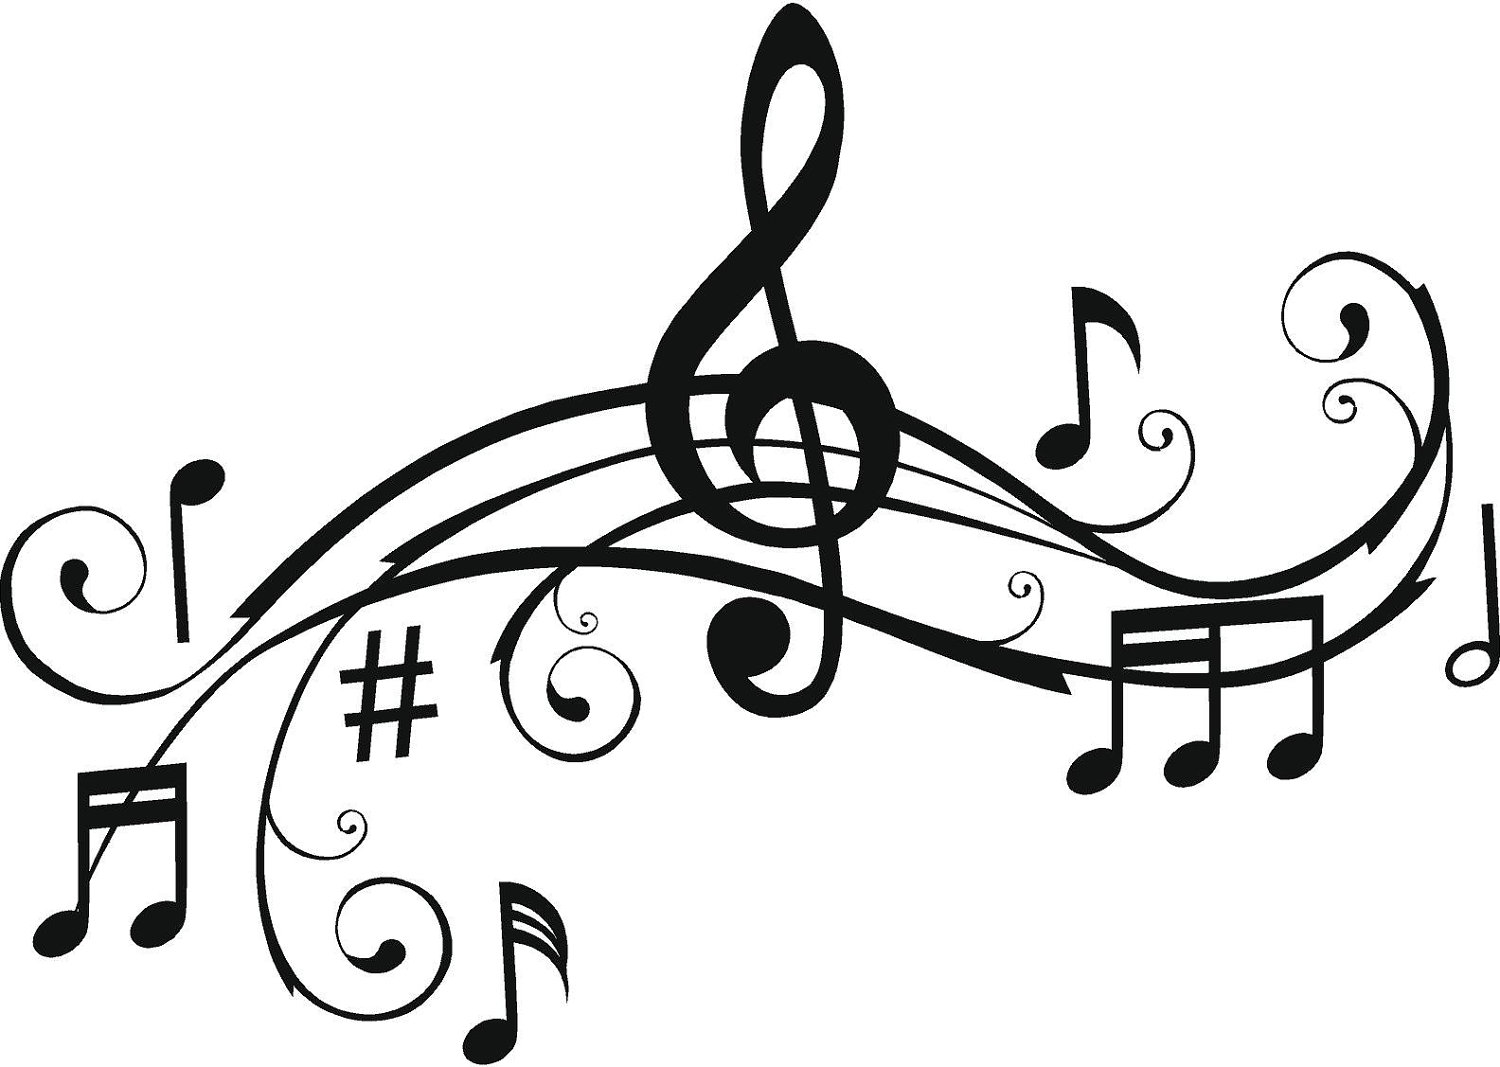 Cool Music Notes Drawings - ClipArt Best